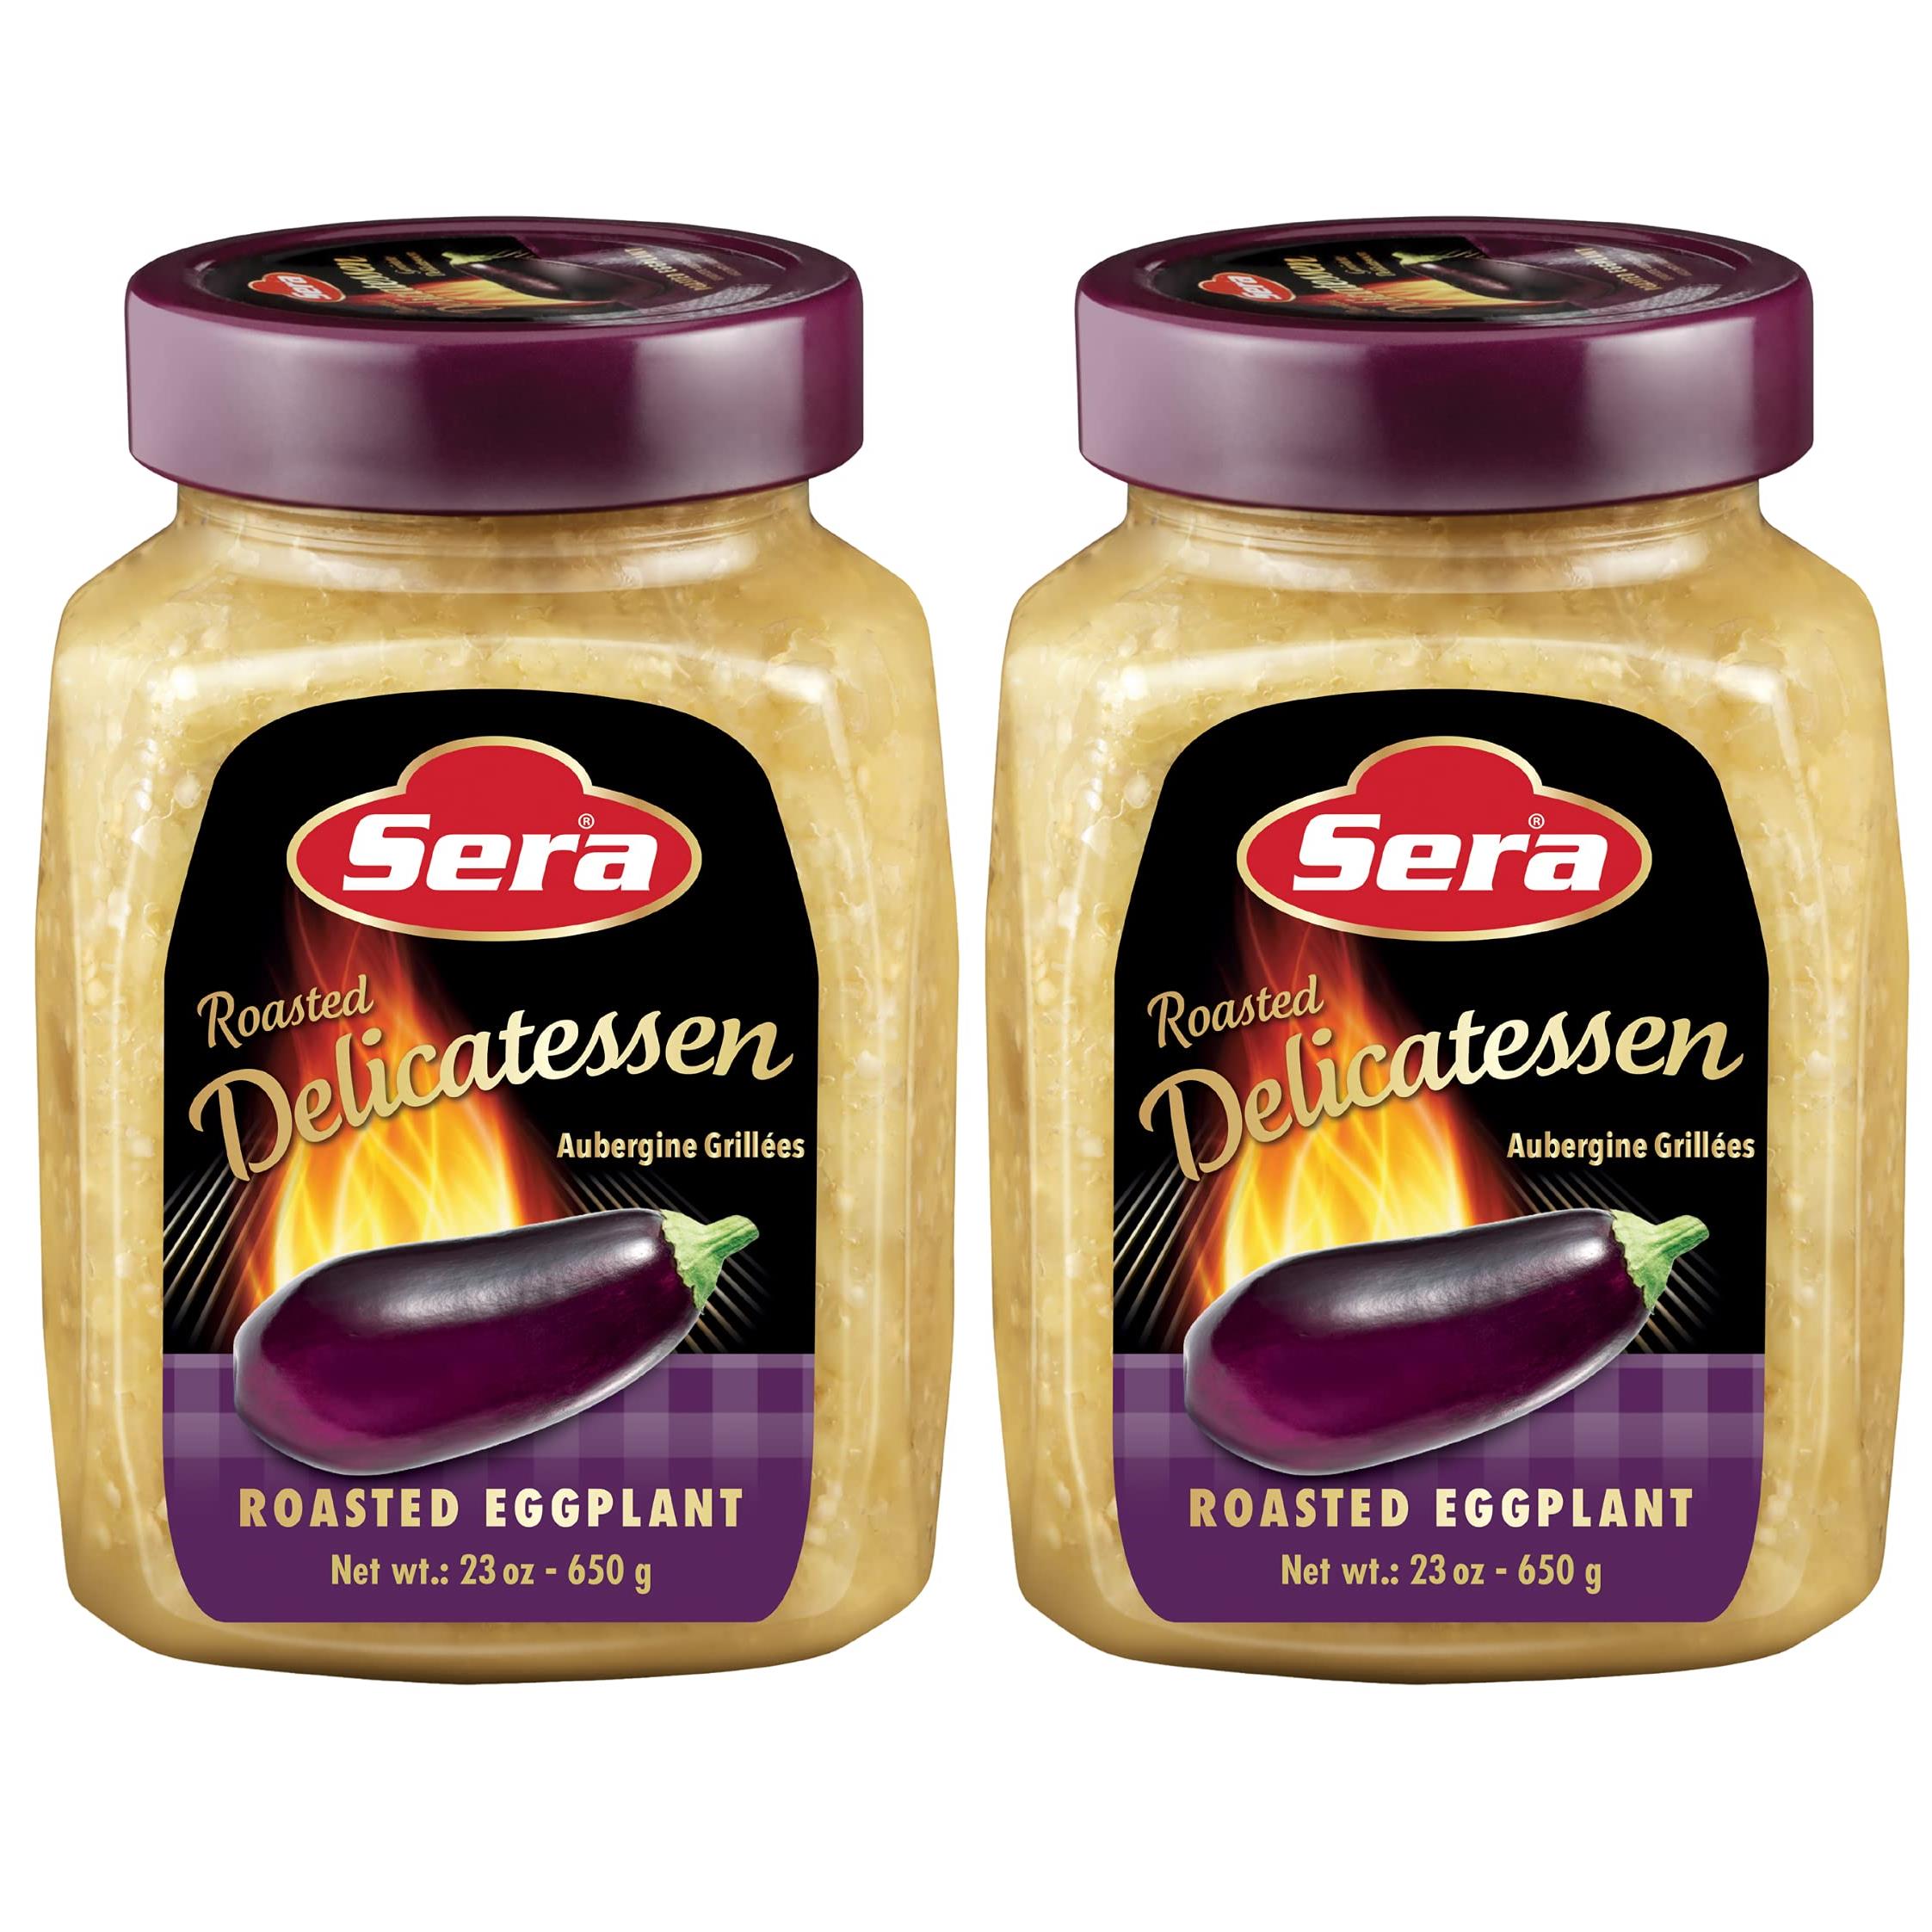 Sera Roasted Delicatessen Roasted Eggplant 23 Oz | Ready to Serve Precooked Eggplant | Smokey Flavor | Perfect for Grilling, Vegetables, Meats, Sandwiches! | Kosher (2 PACK)